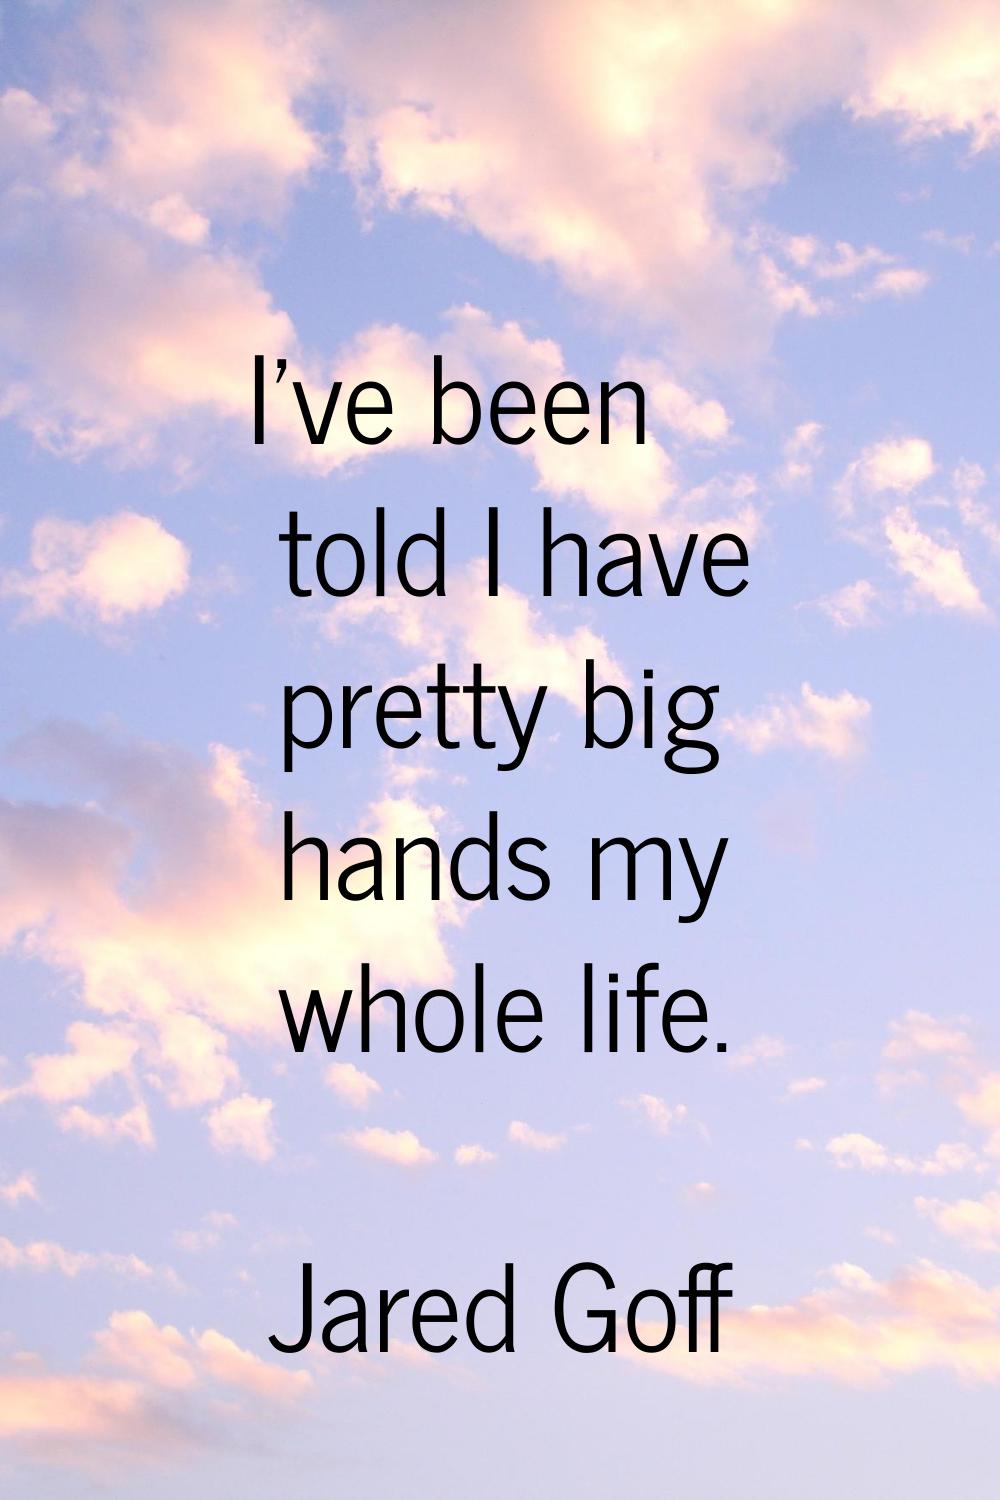 I've been told I have pretty big hands my whole life.